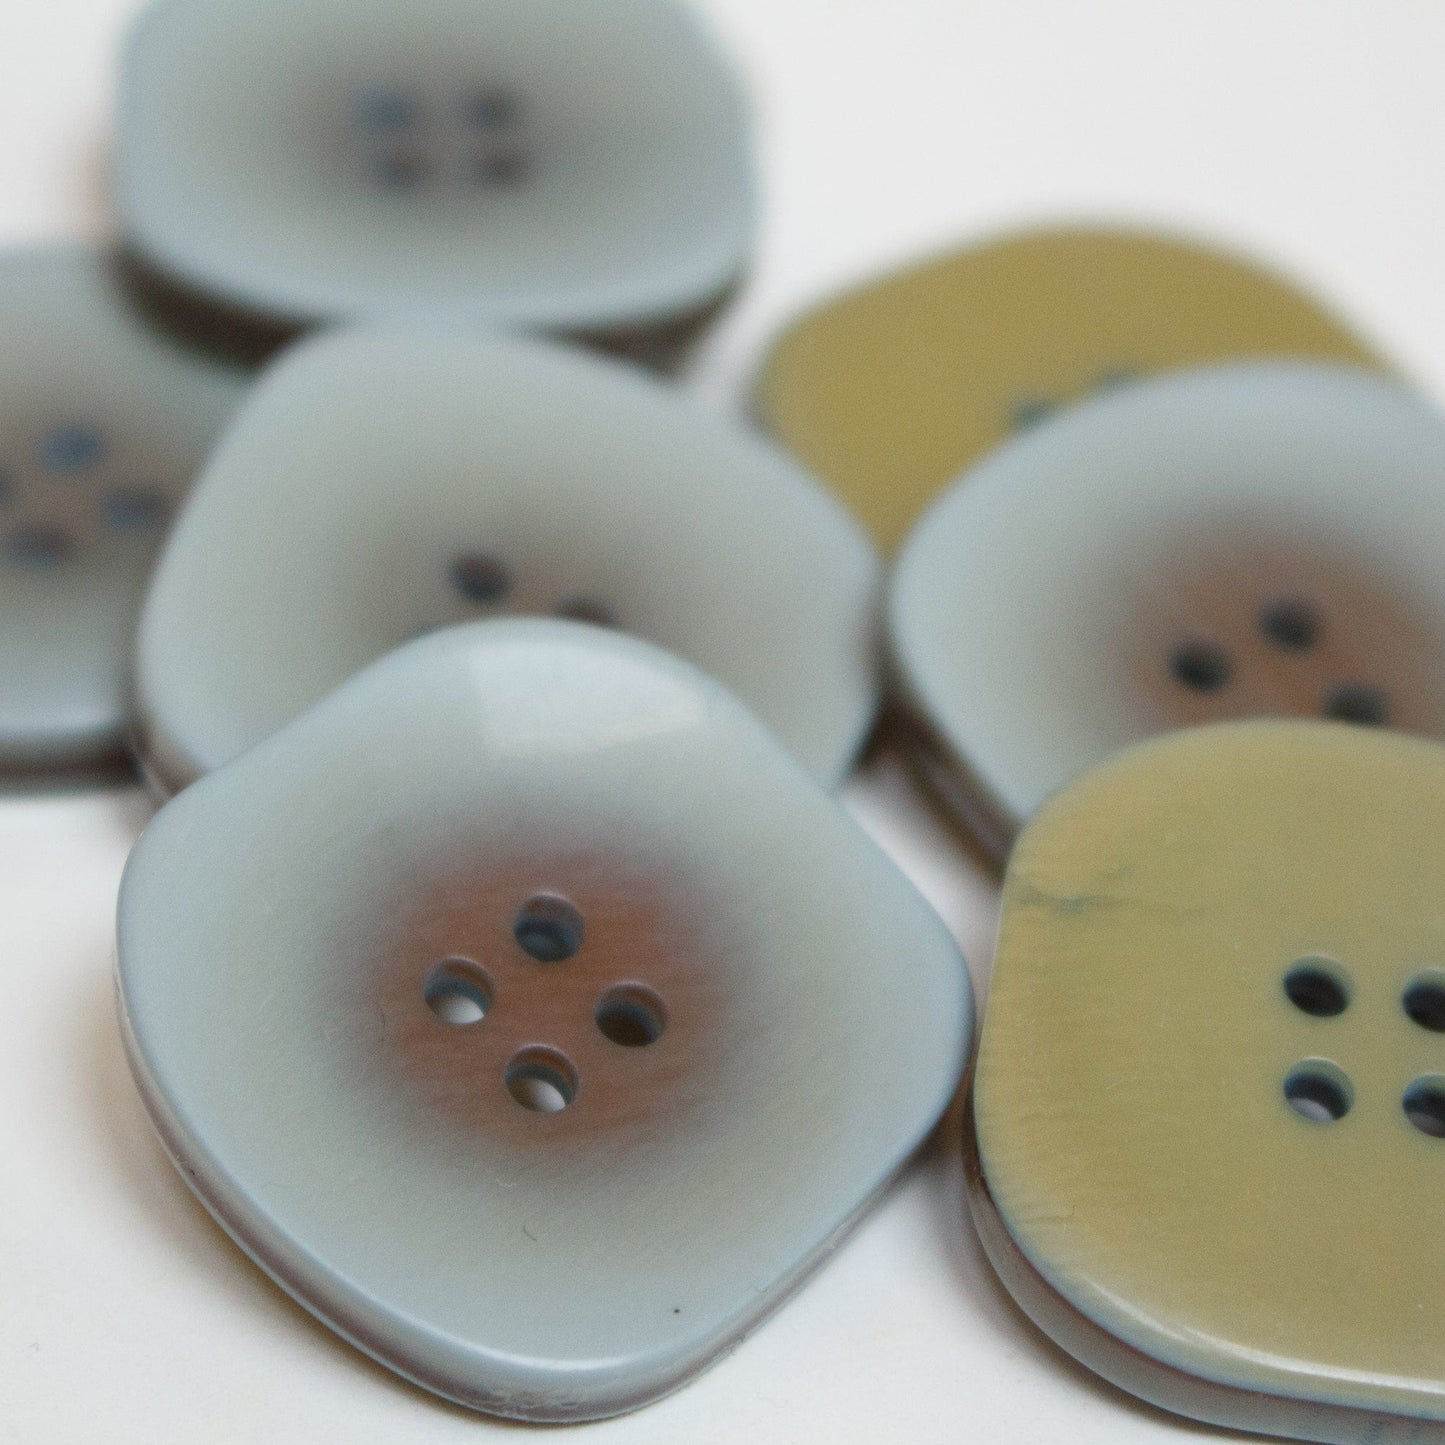 5 x Irregular Square Buttons in Sage Green - 28mm